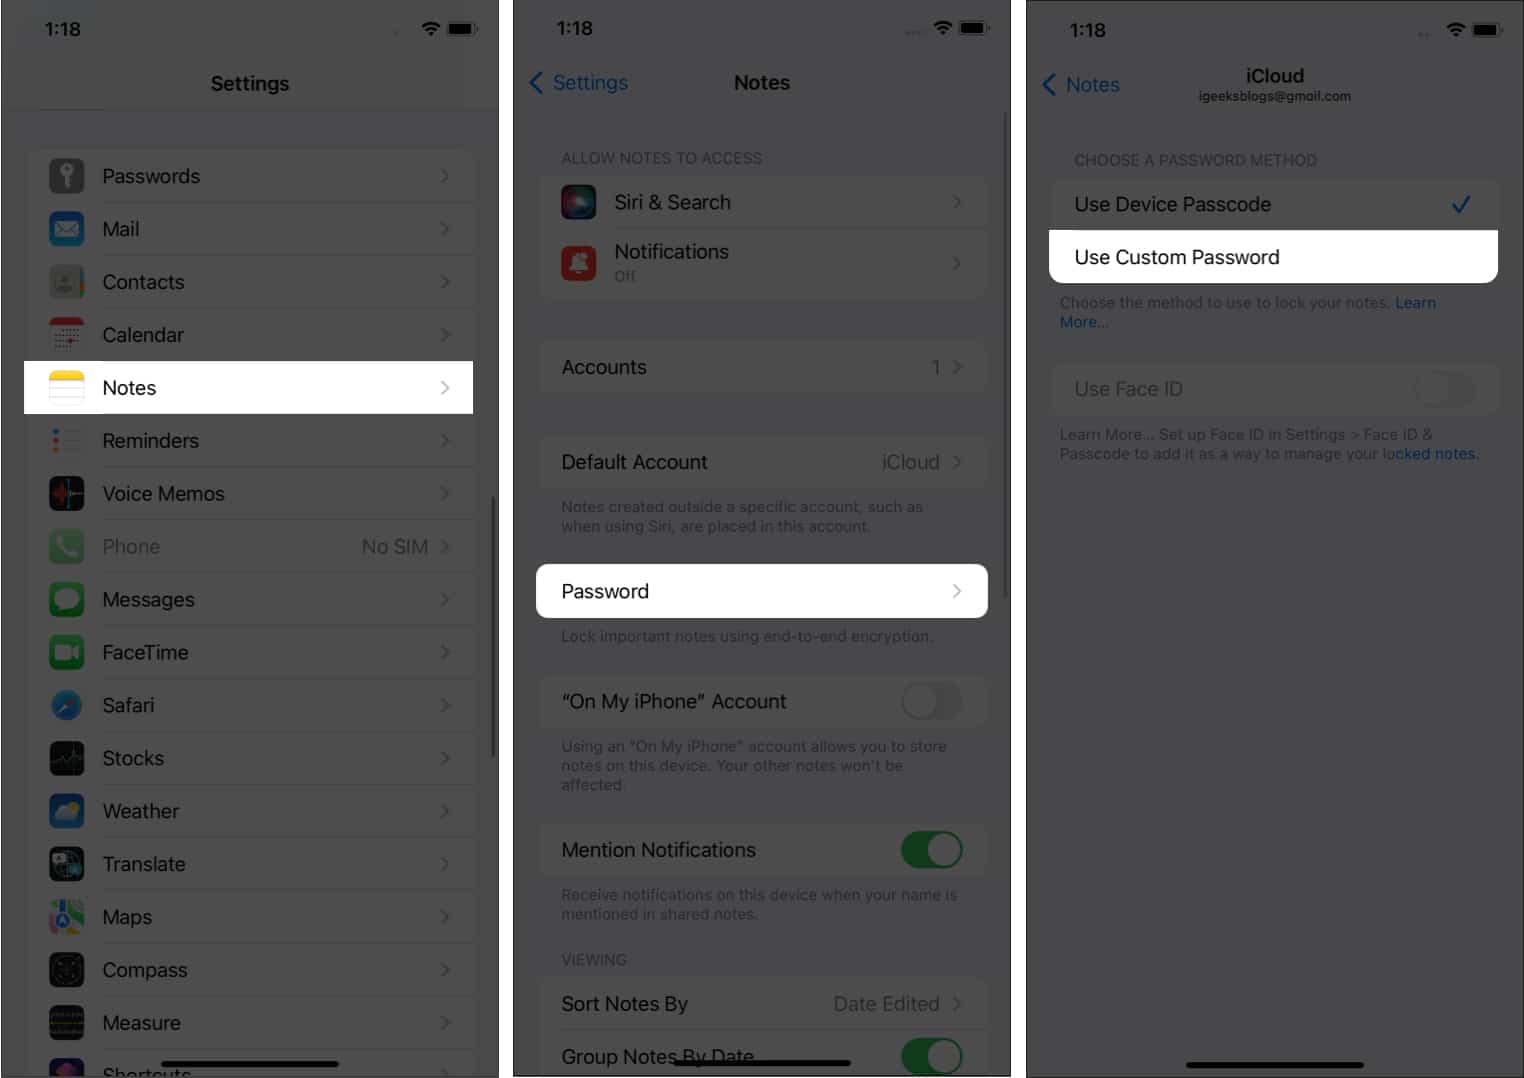 Tap Use Custom Password to lock Notes in settings on iPhone